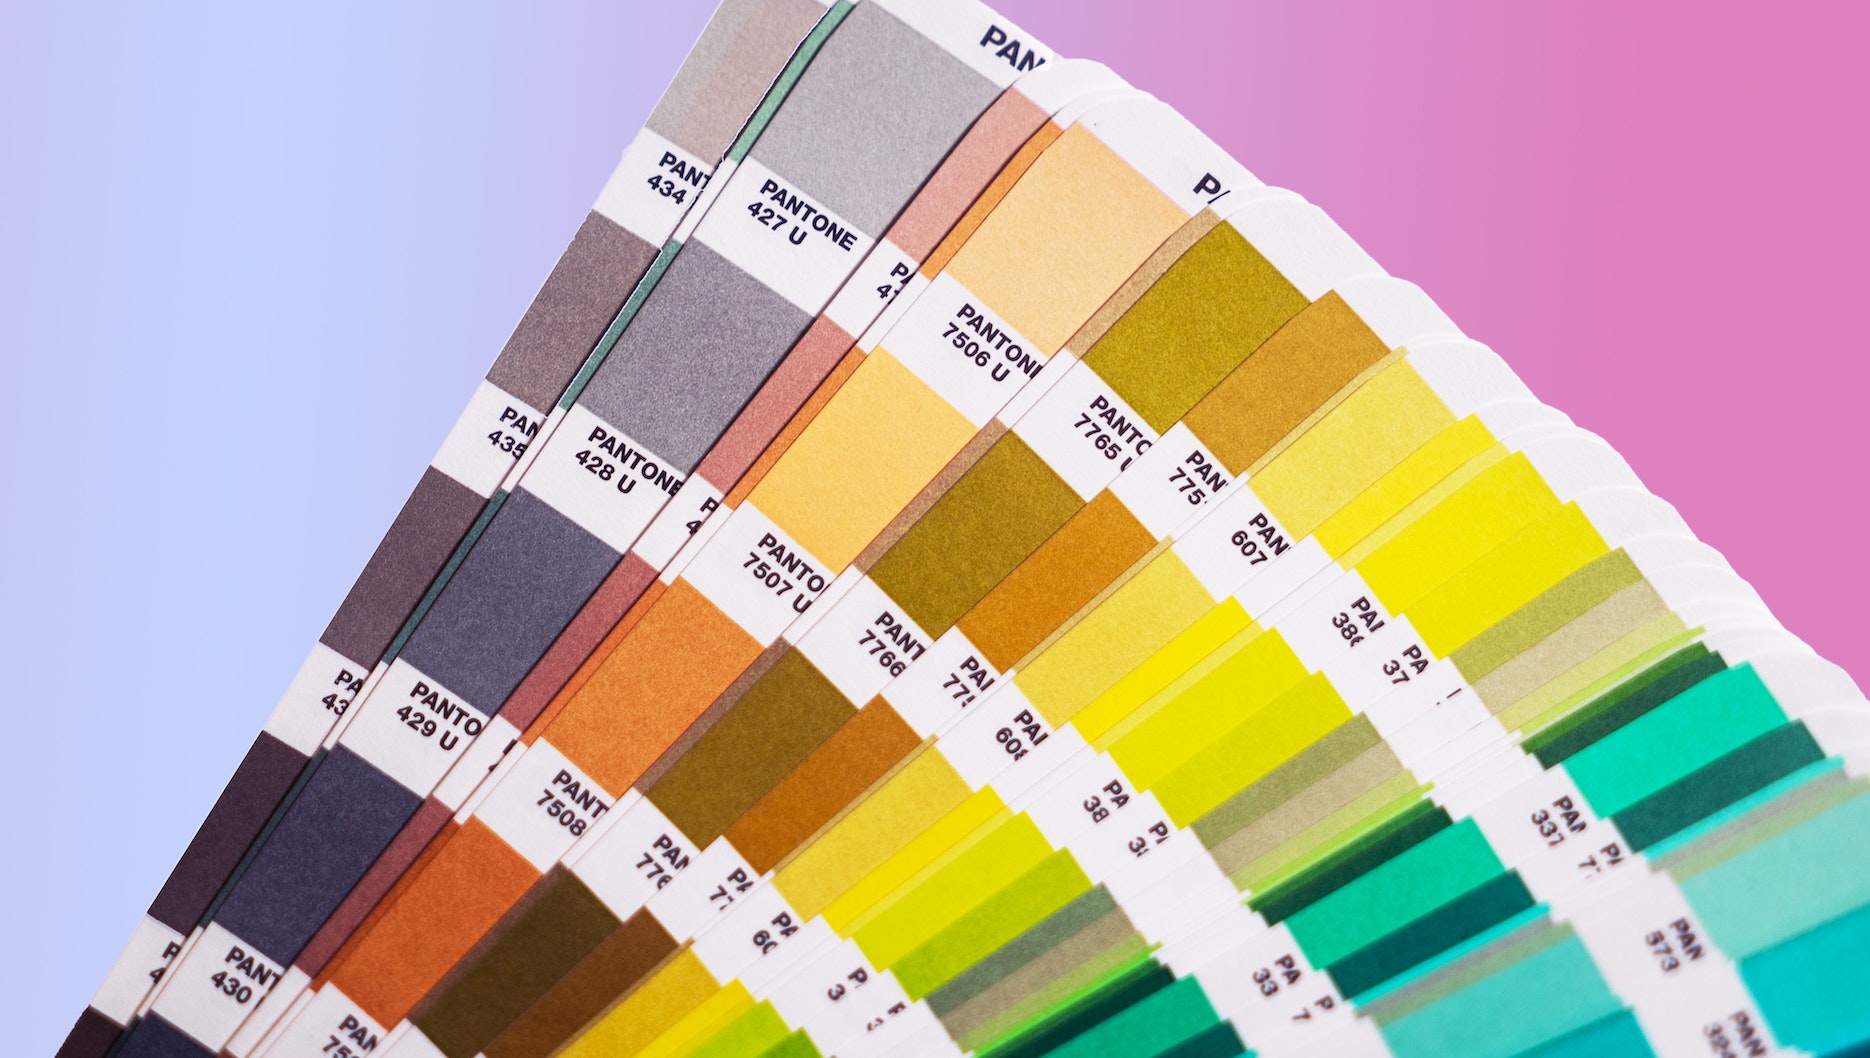 An array of Pantone color swatches against an ombre background